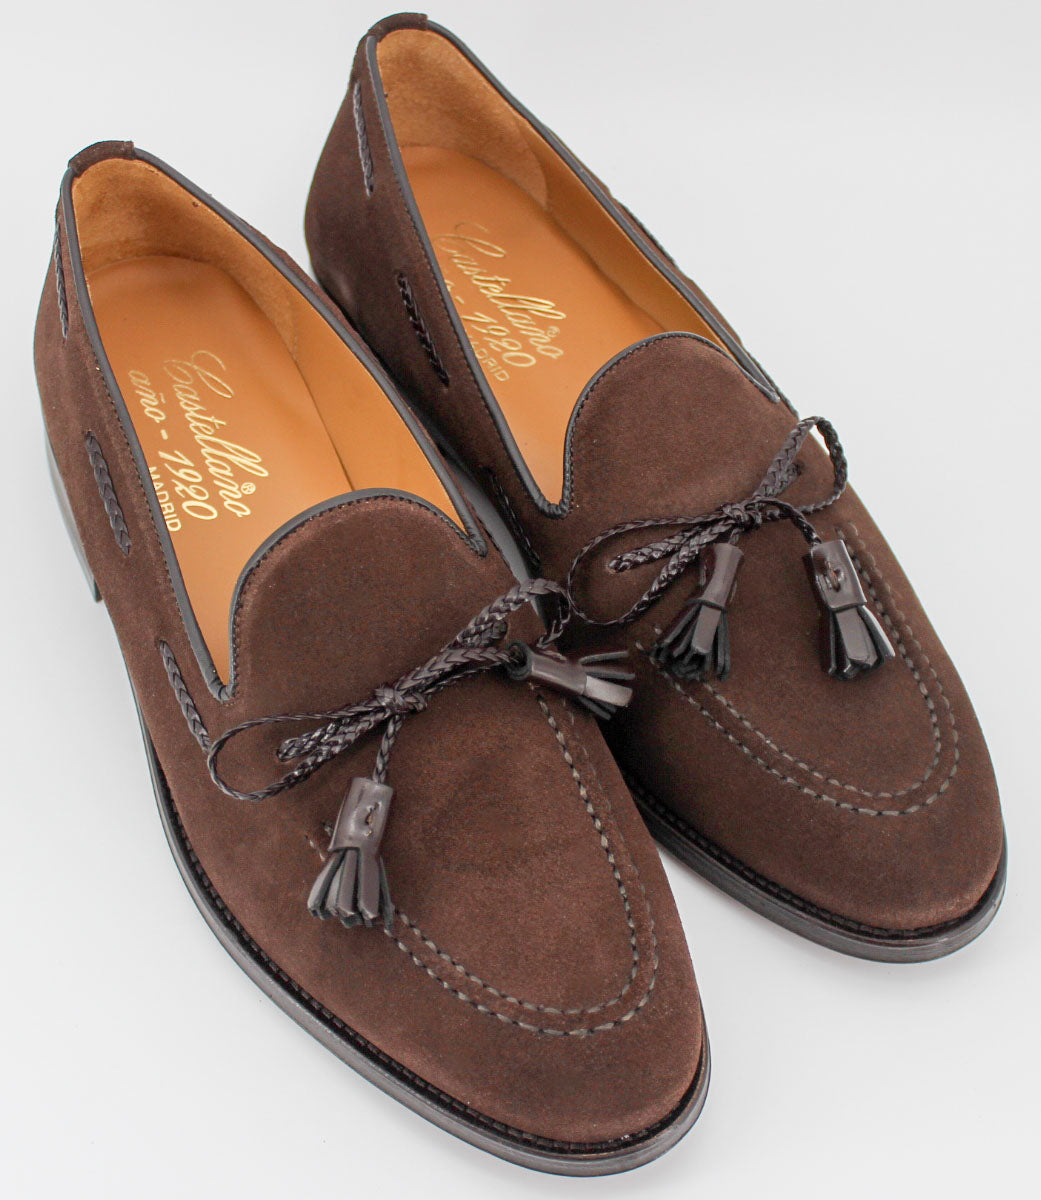 Men's loafers 4516F brown suede leather